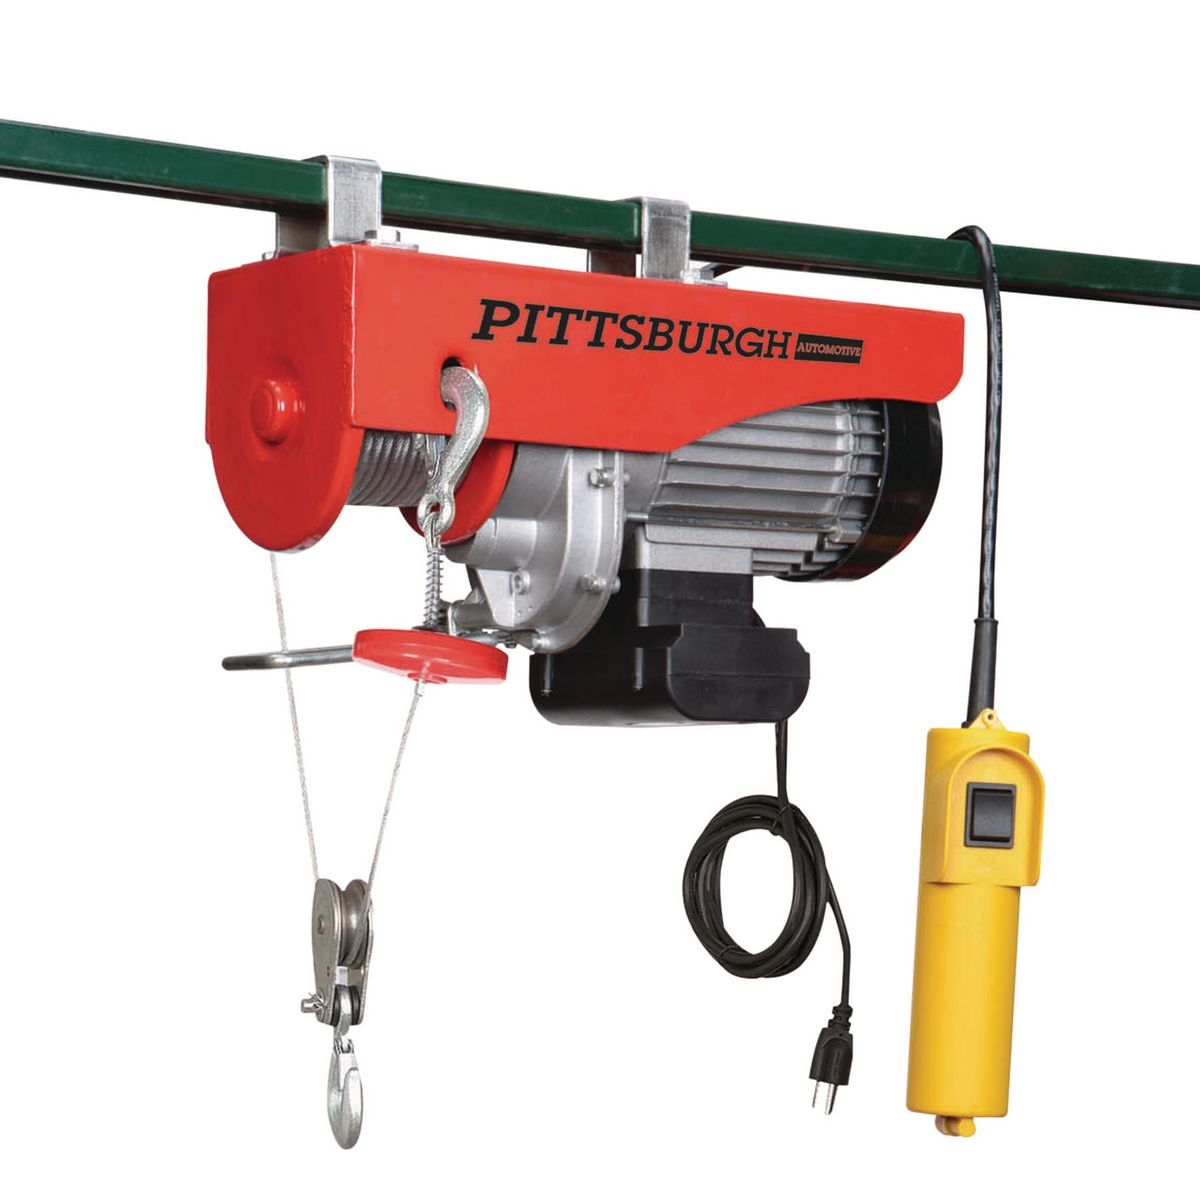 PITTSBURGH AUTOMOTIVE 1300 lb. Electric Hoist with Remote Control - Item 62853 / 02954 / 60344 / 69739